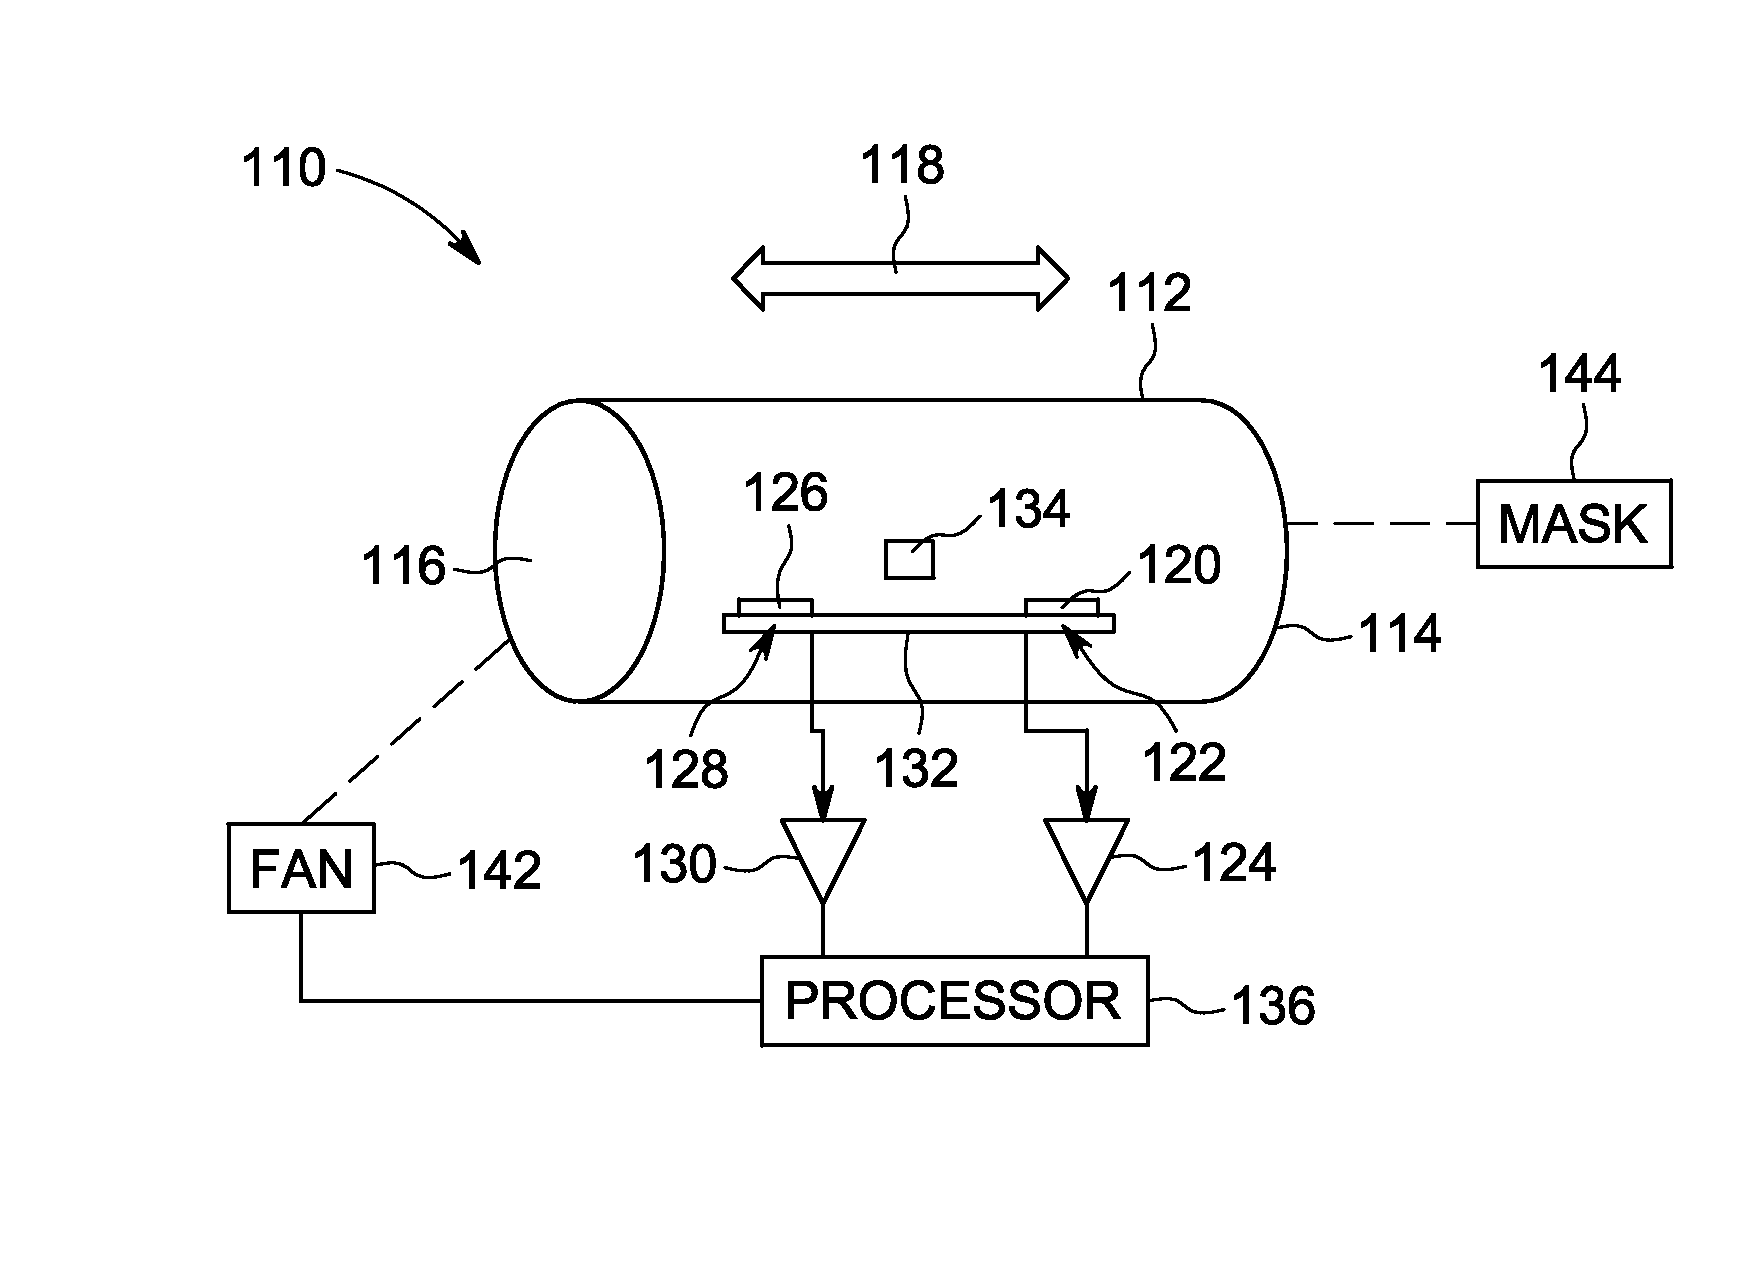 Systems and methods for acoustic detection using flow sensors